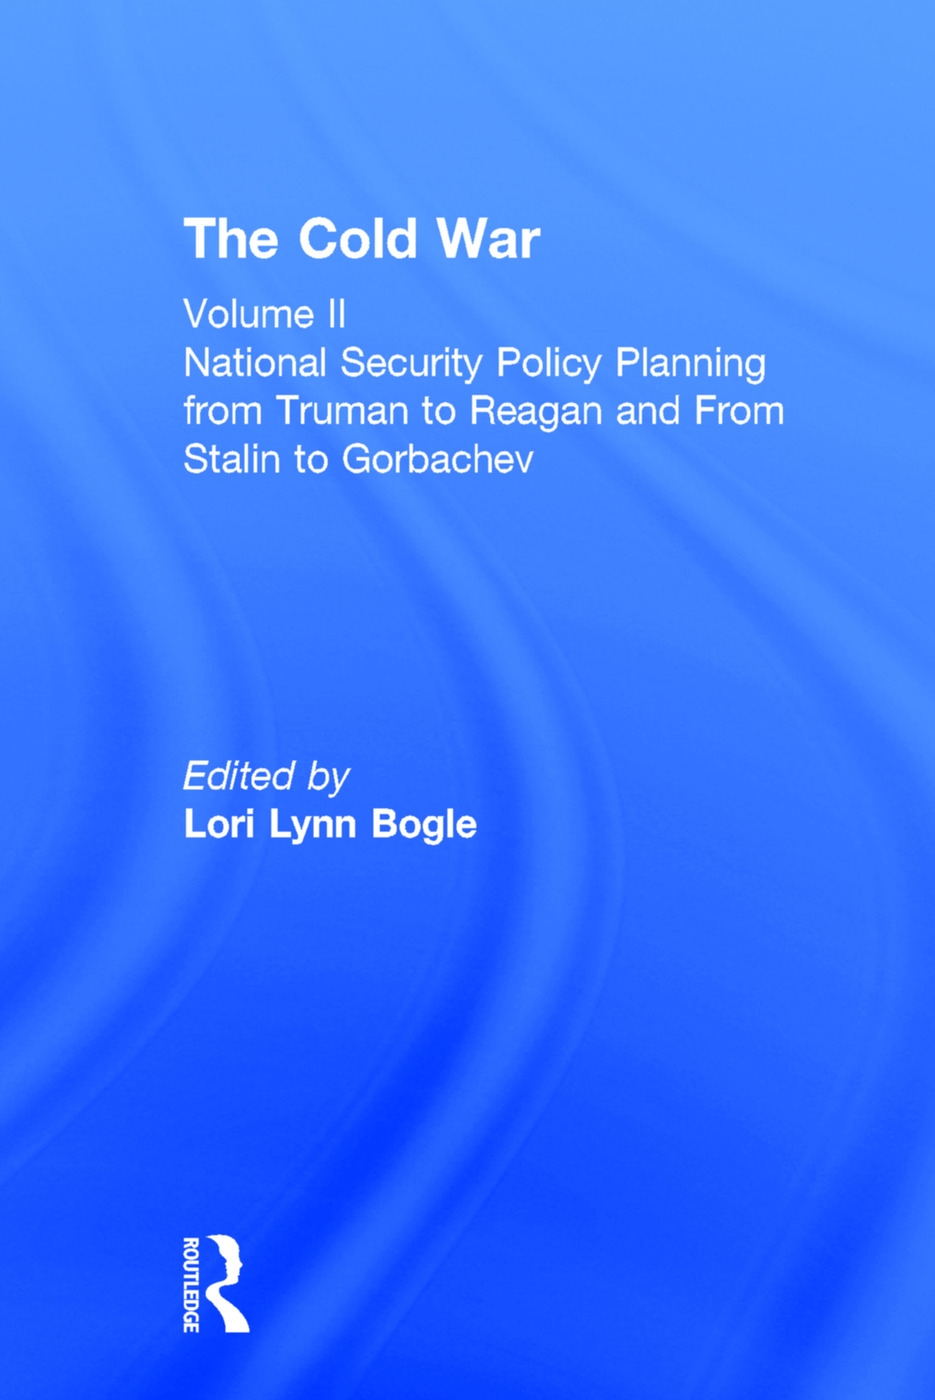 National Security Policy Planning from Truman to Reagan and from Stalin to Gorbachev: The Cold War